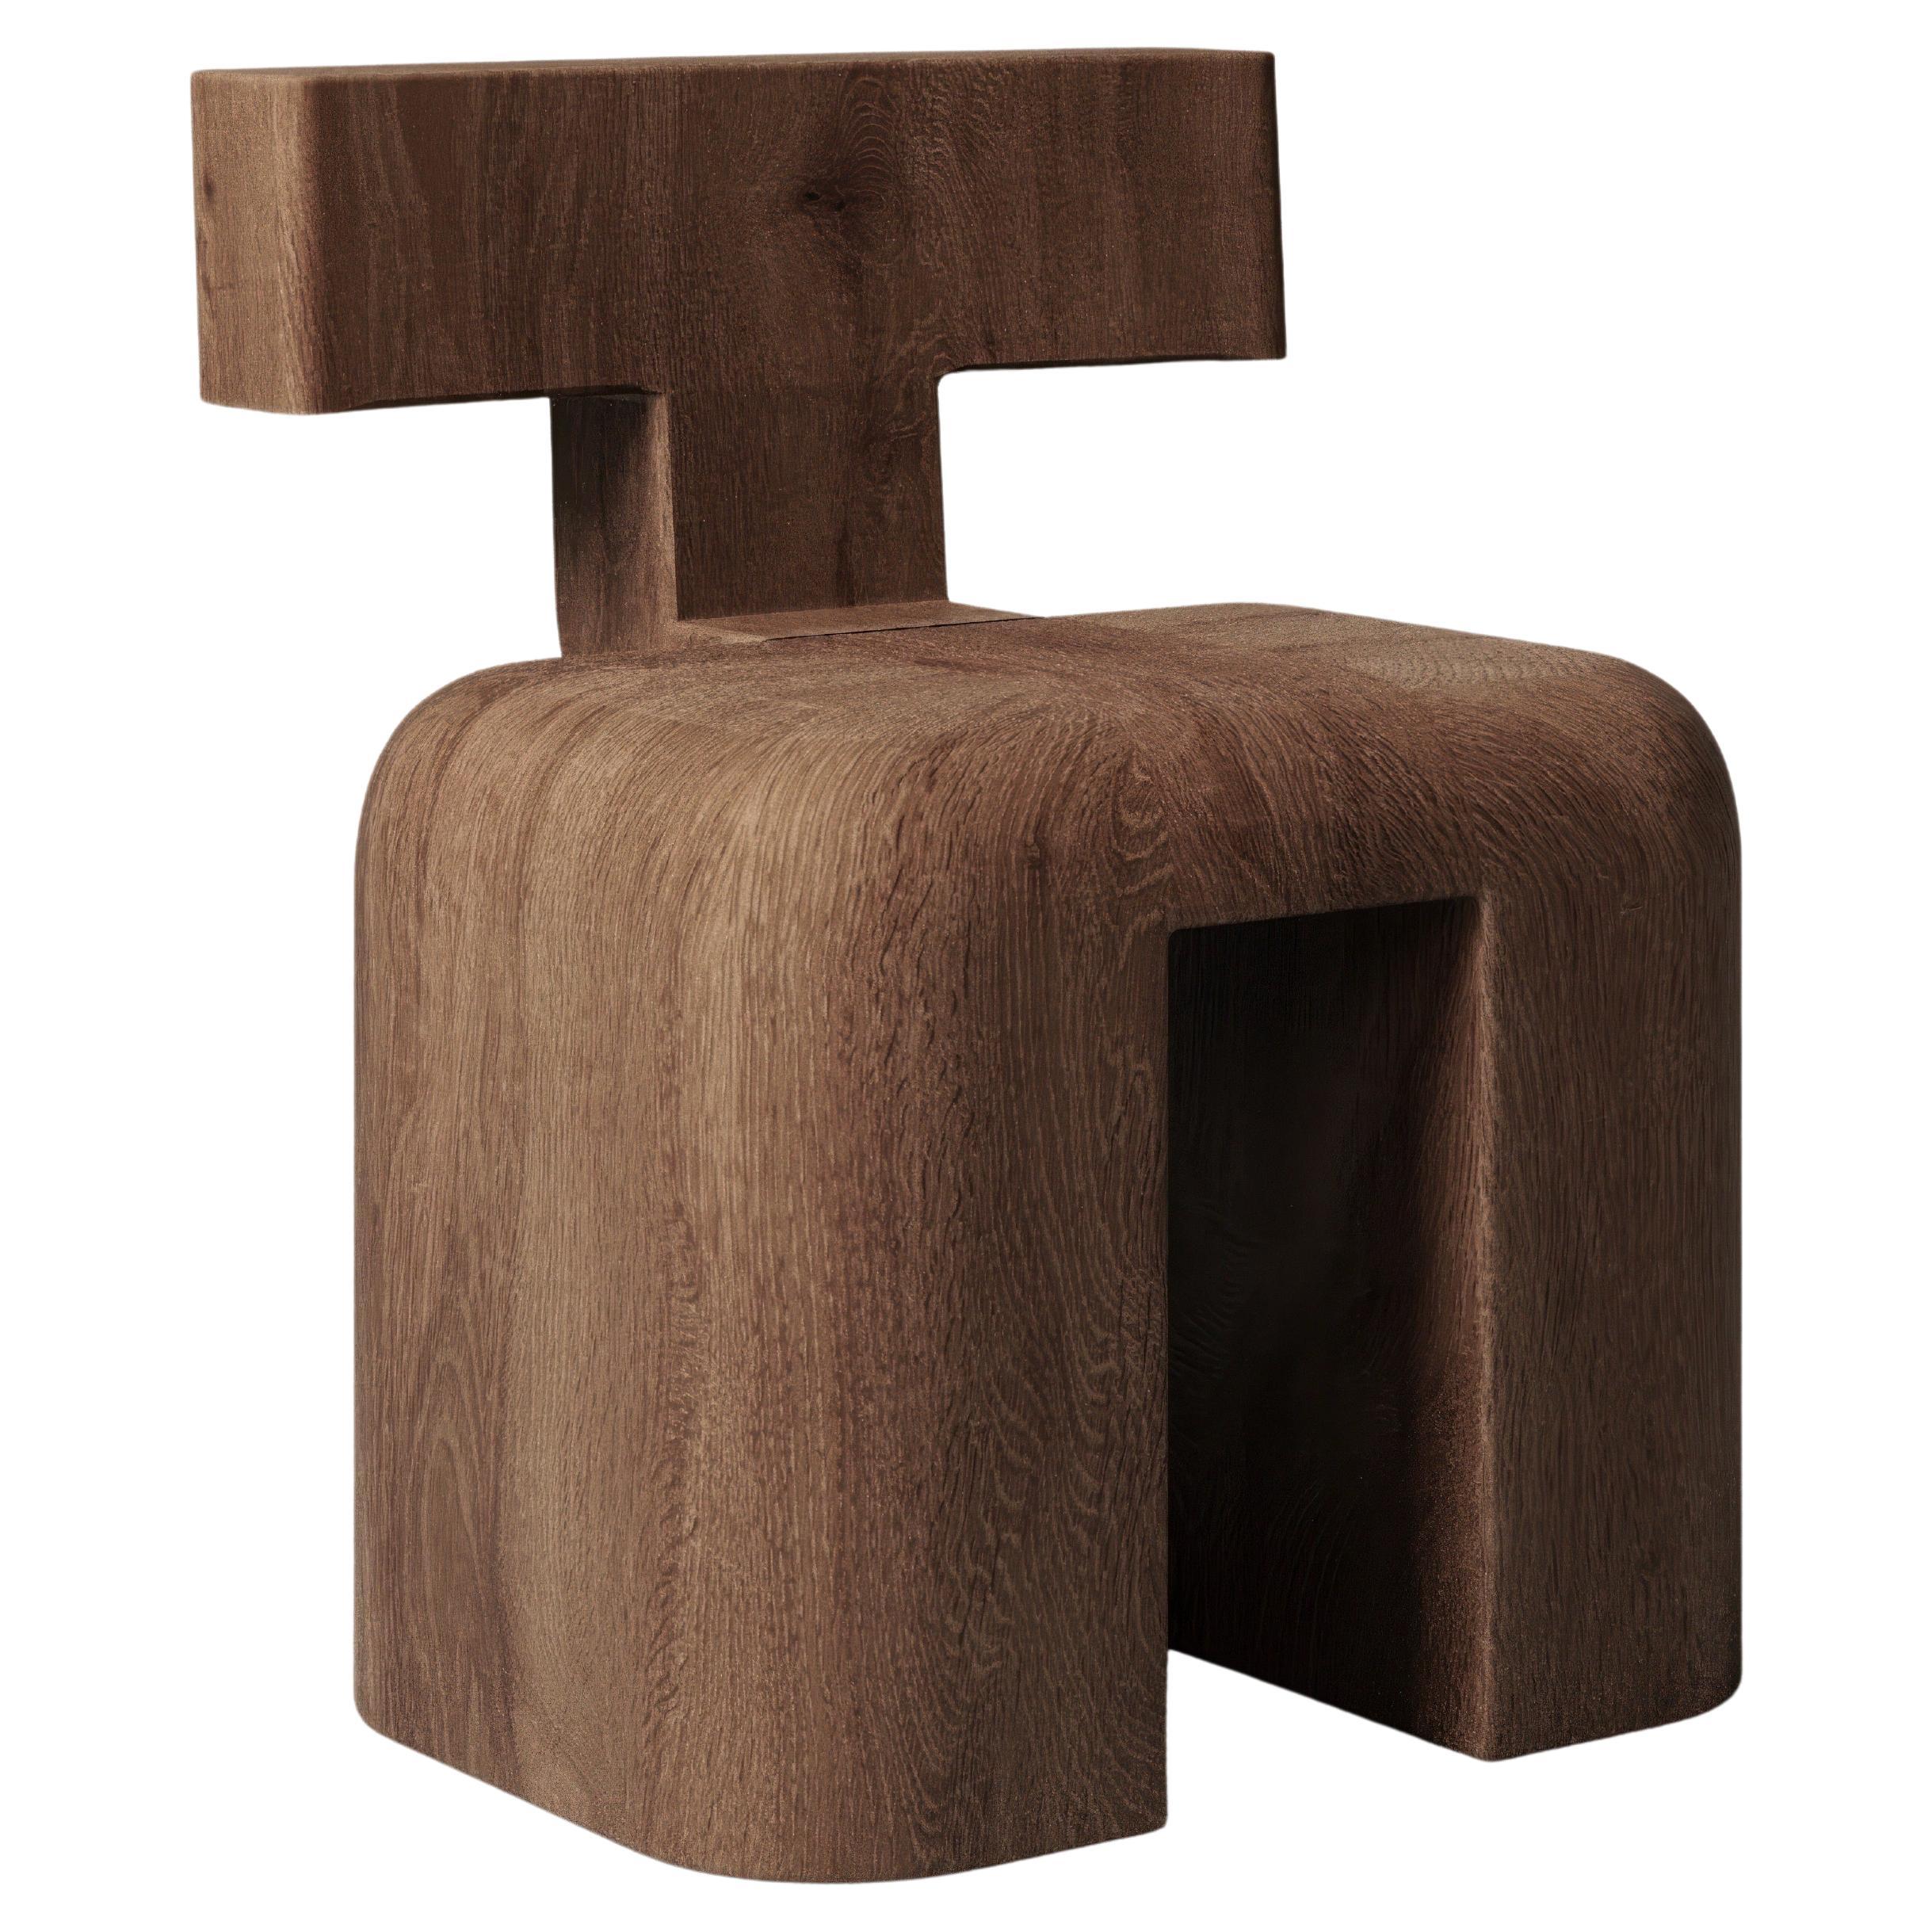 M_013 White Oak Dining Chair by Monolith Studio